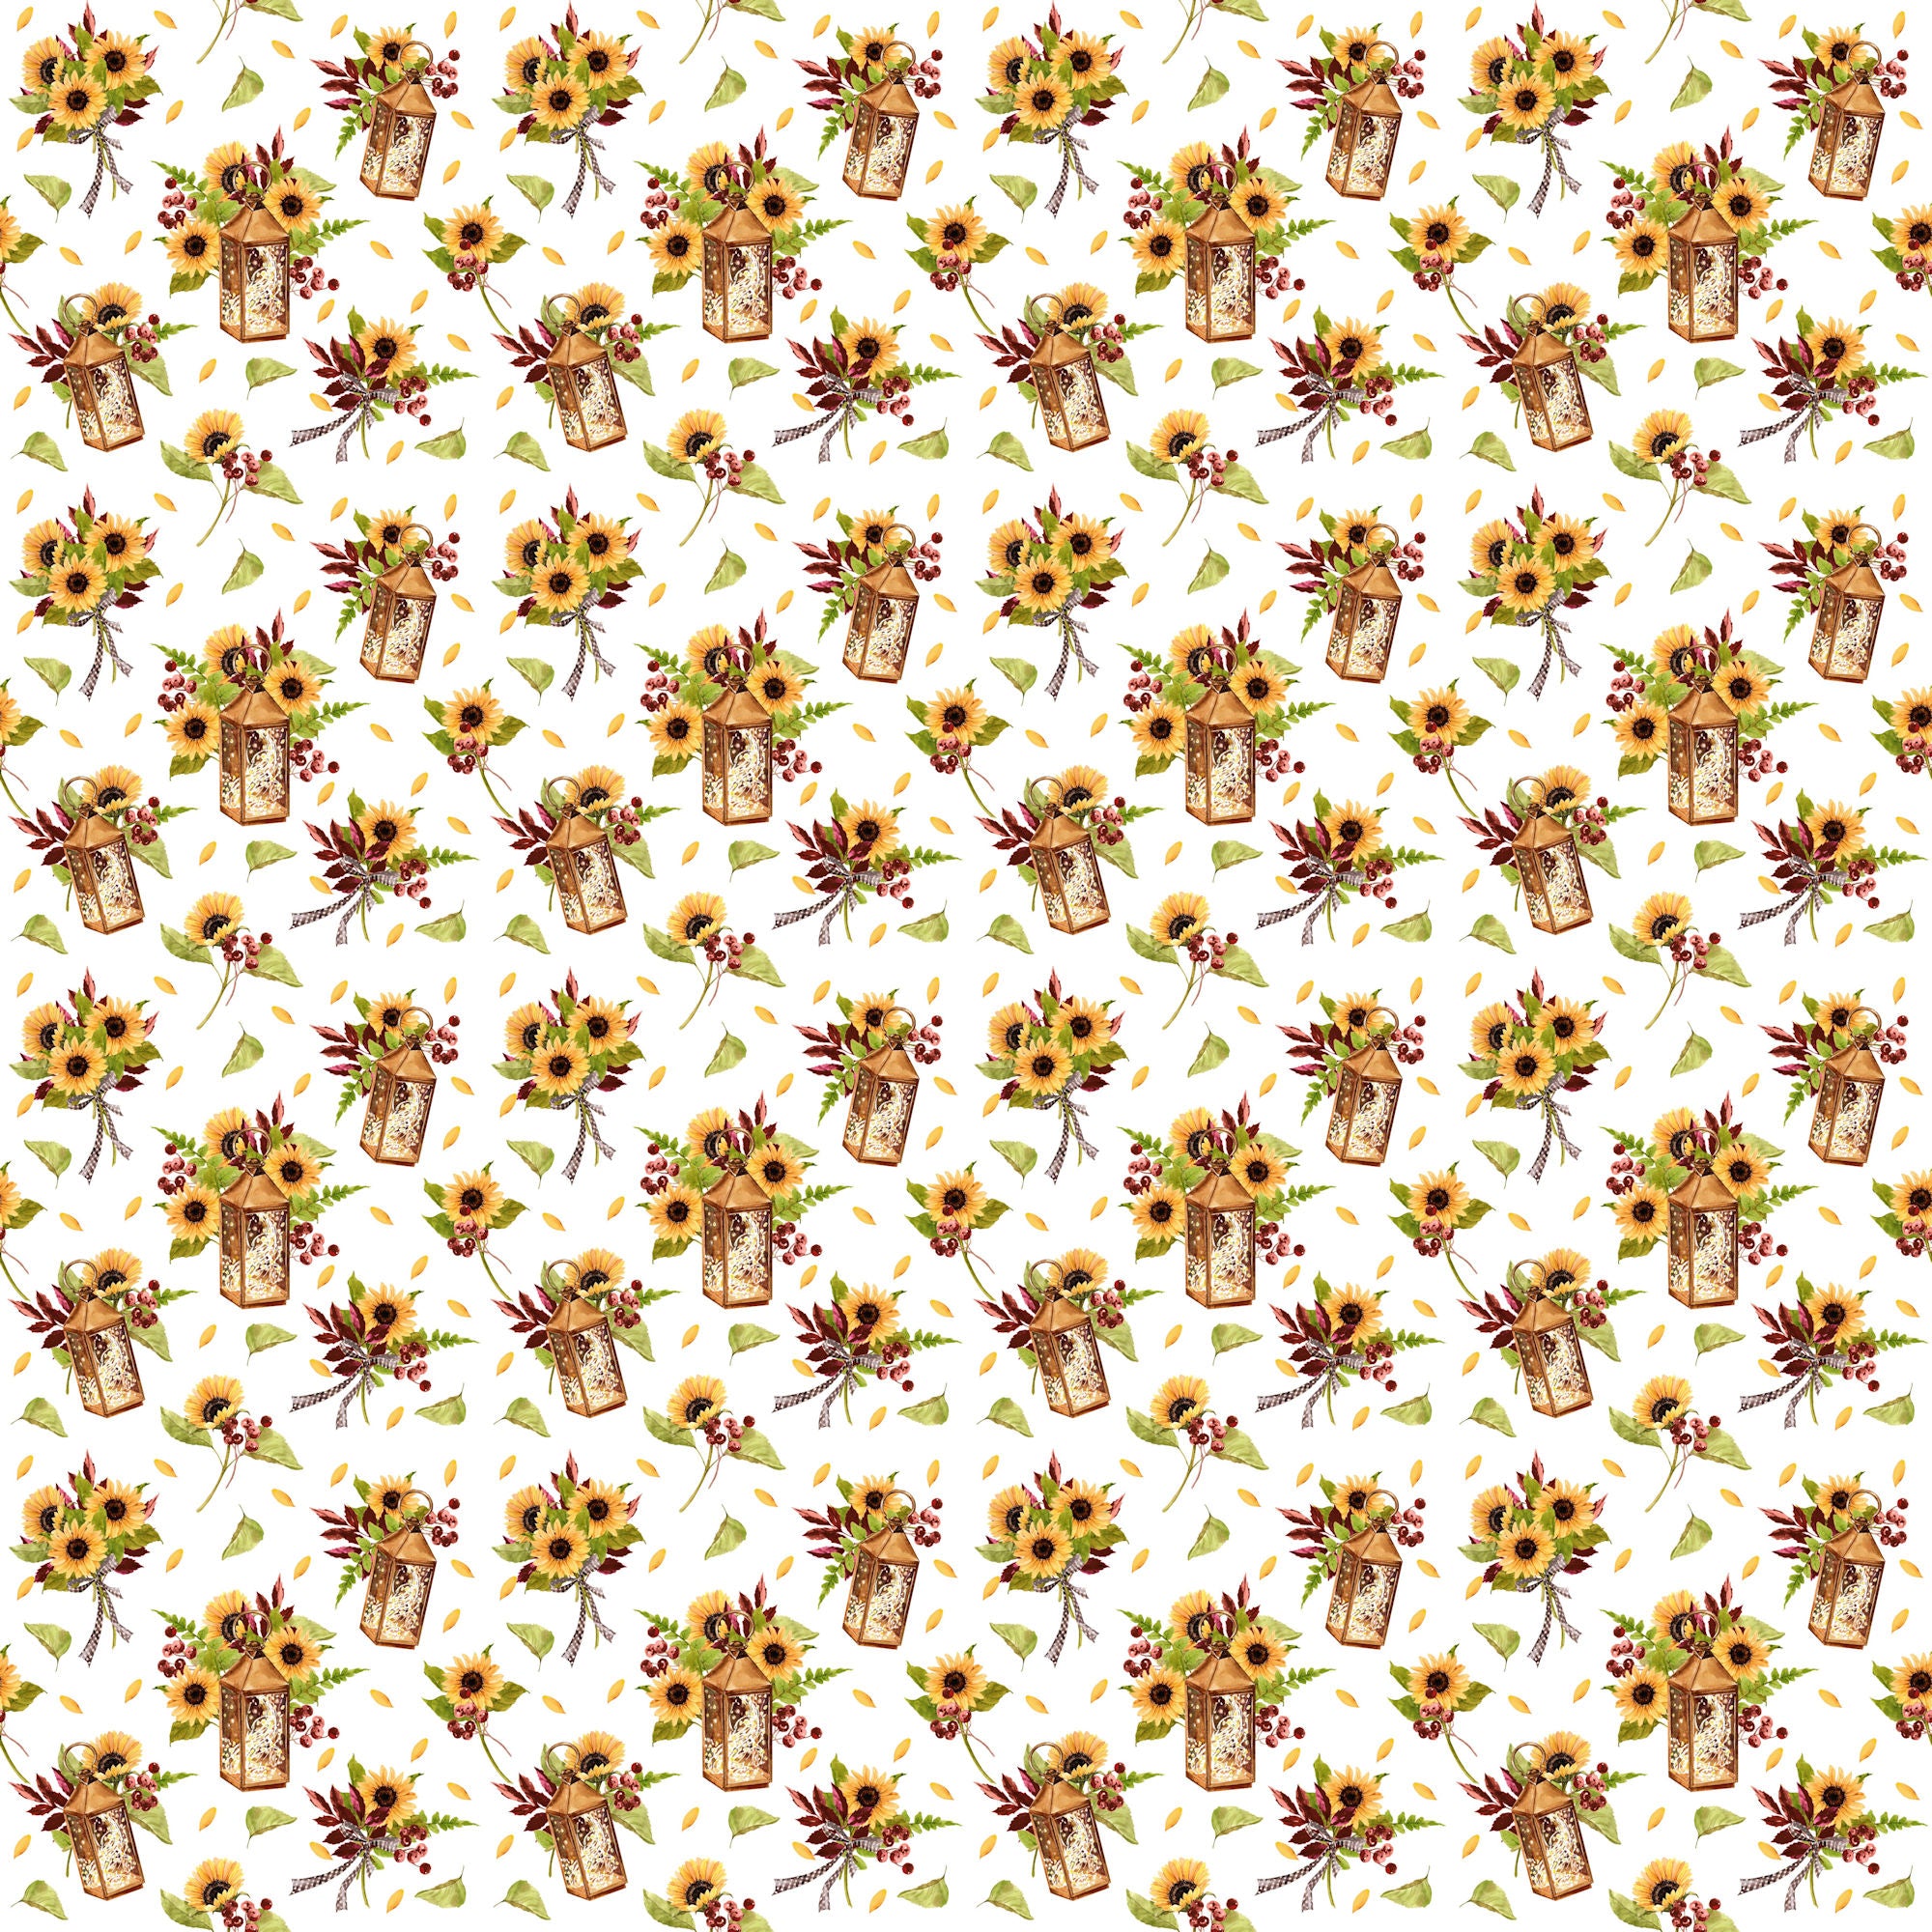 Favorite Fall Collection Sunflower Lanterns 12 x 12 Double-Sided Scrapbook Paper by SSC Designs